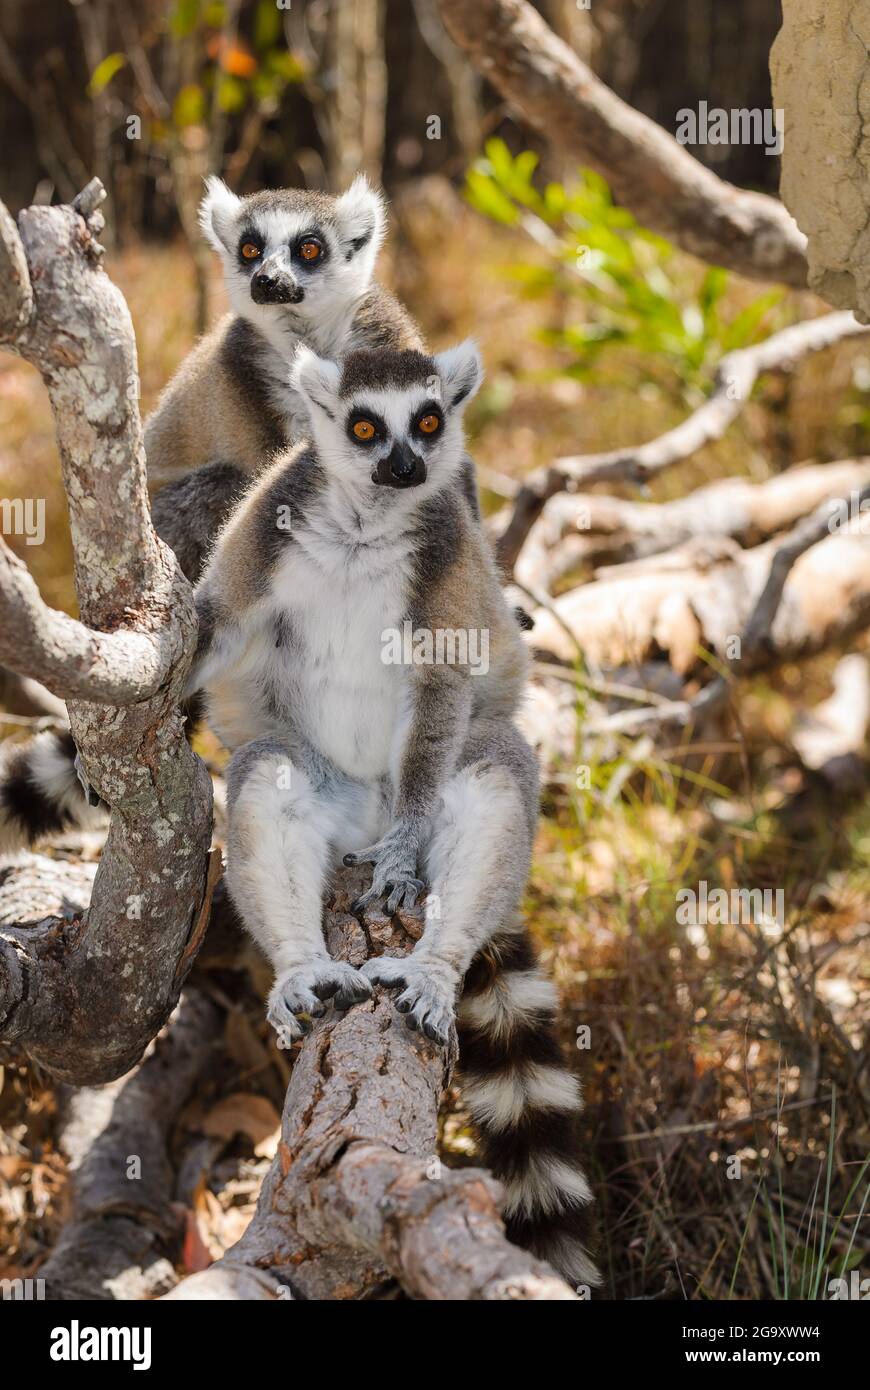 A pair of alert Ring-tail lemurs stare inquisitively in the woodland habitat of an exotic natural, wildlife reserve in Far North Queensland. Stock Photo